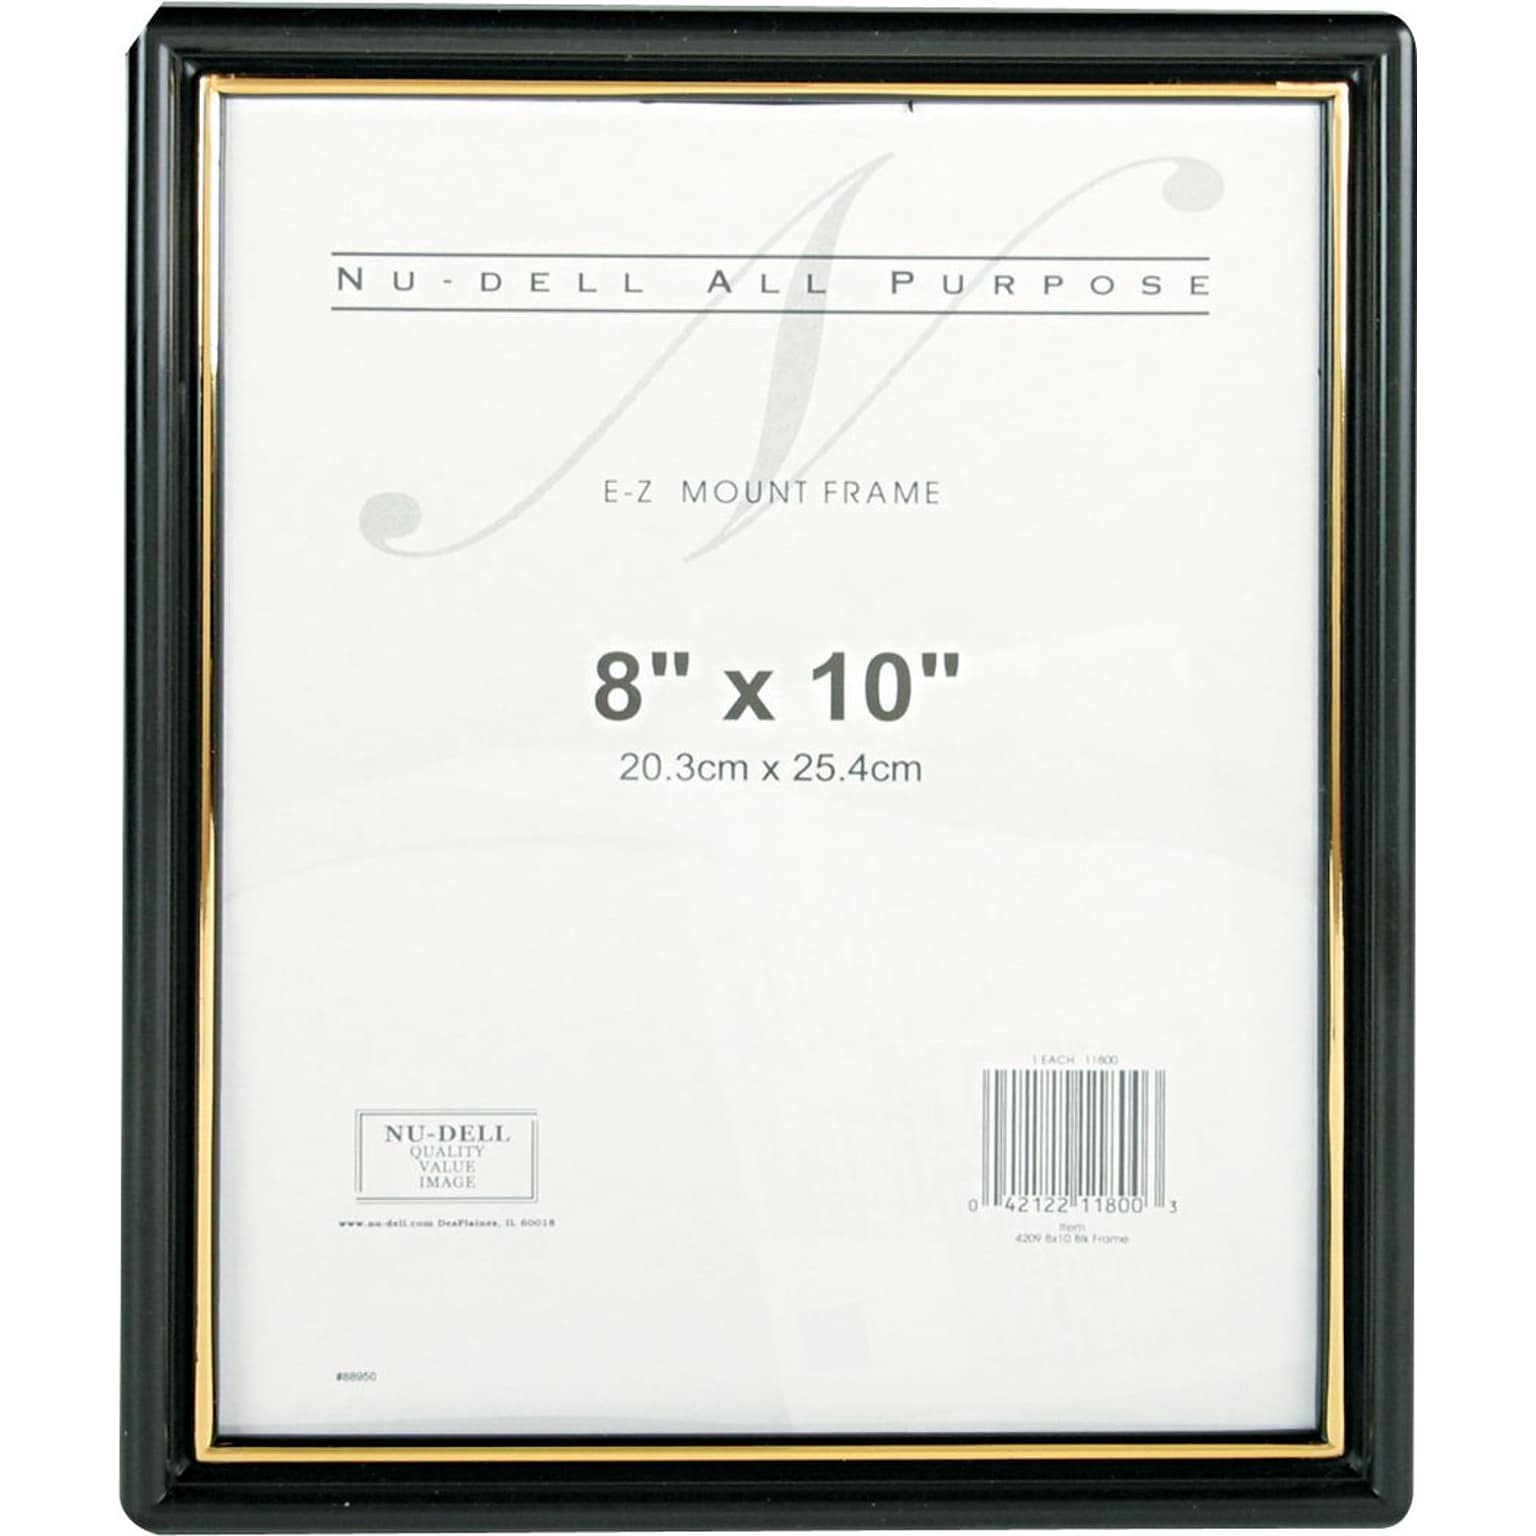 NuDell EZ Mount 8 x 10 Plastic Document Frame, Black with Gold Border (11800)